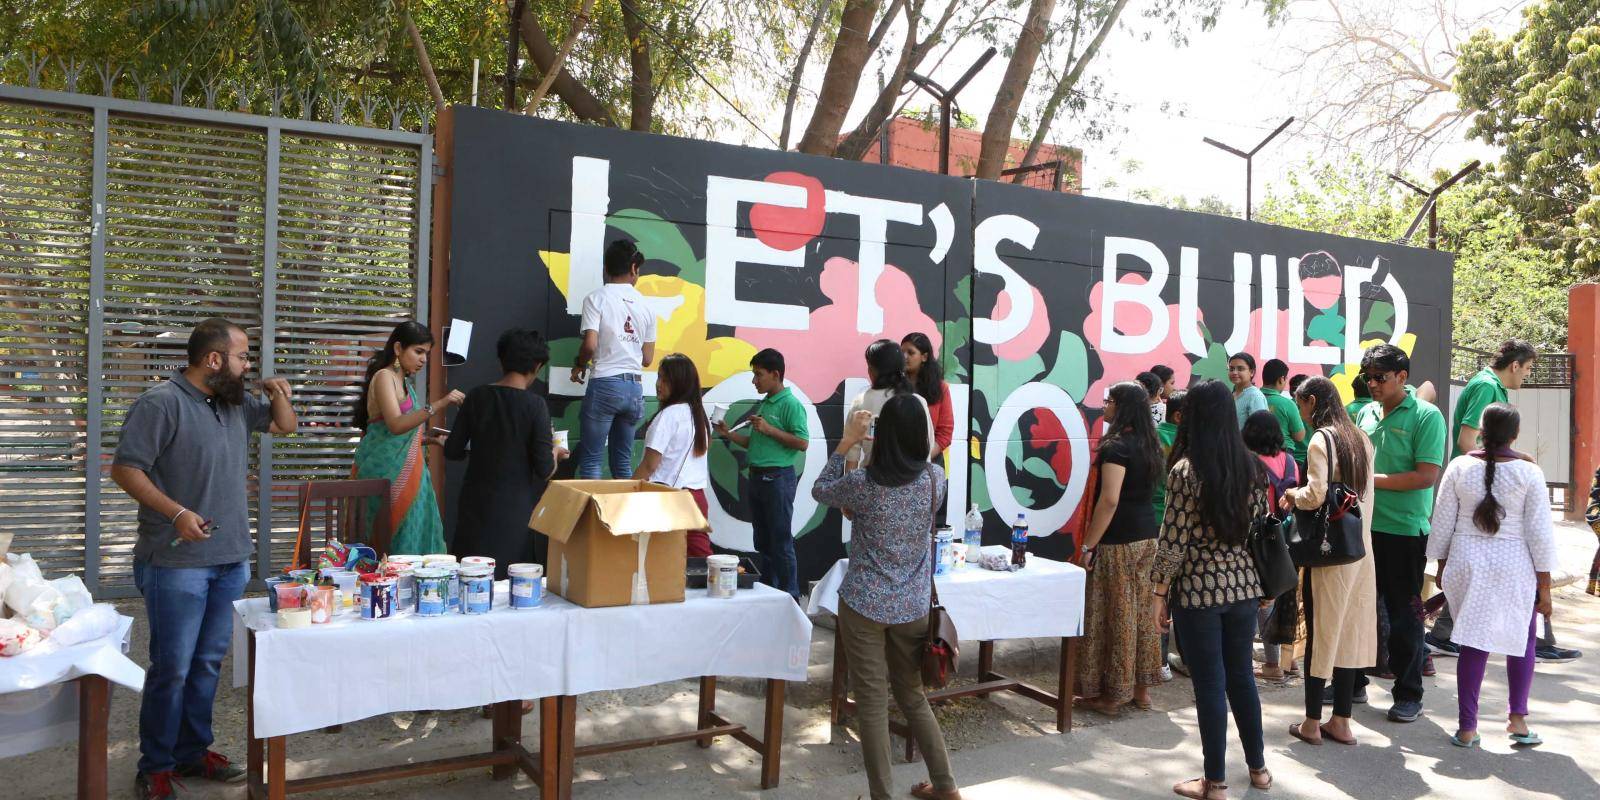 At a street art event in New Delhi, the phrase Let's Build Tomorrow is painted on a wall